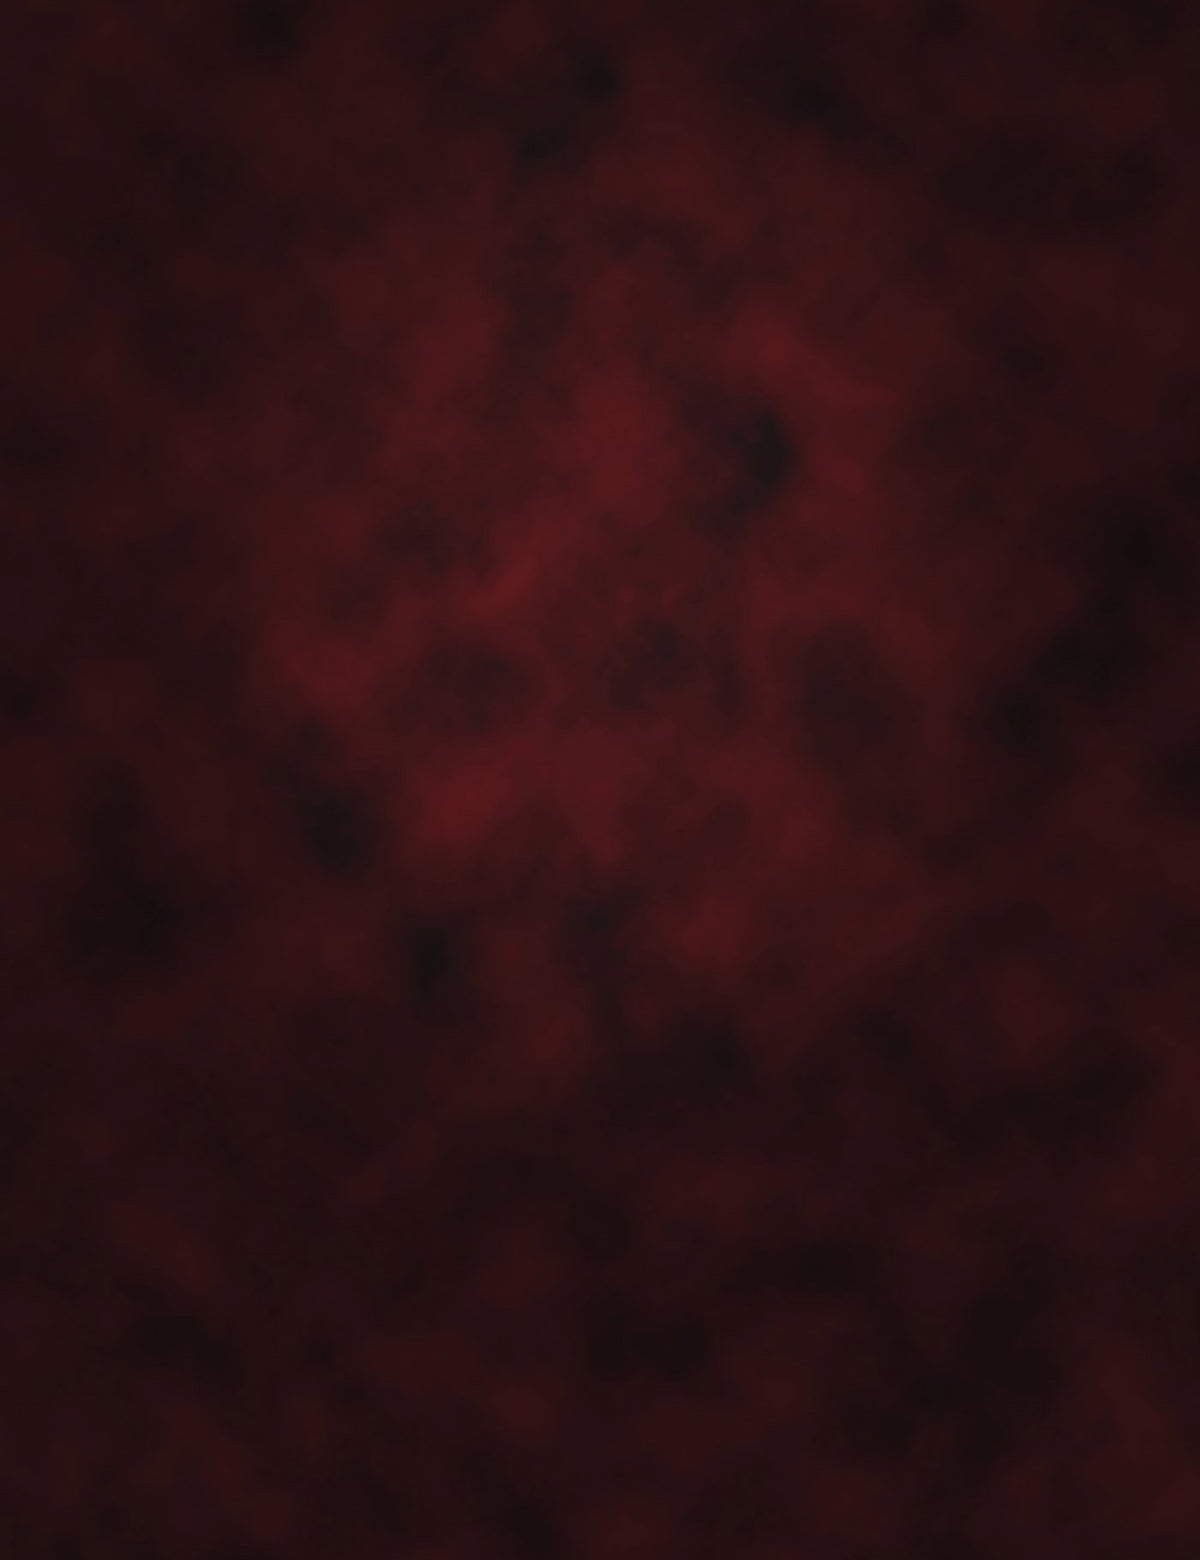 Abstract Dark Red Texture With Little Black Photography Backdrop J-0644 Shopbackdrop